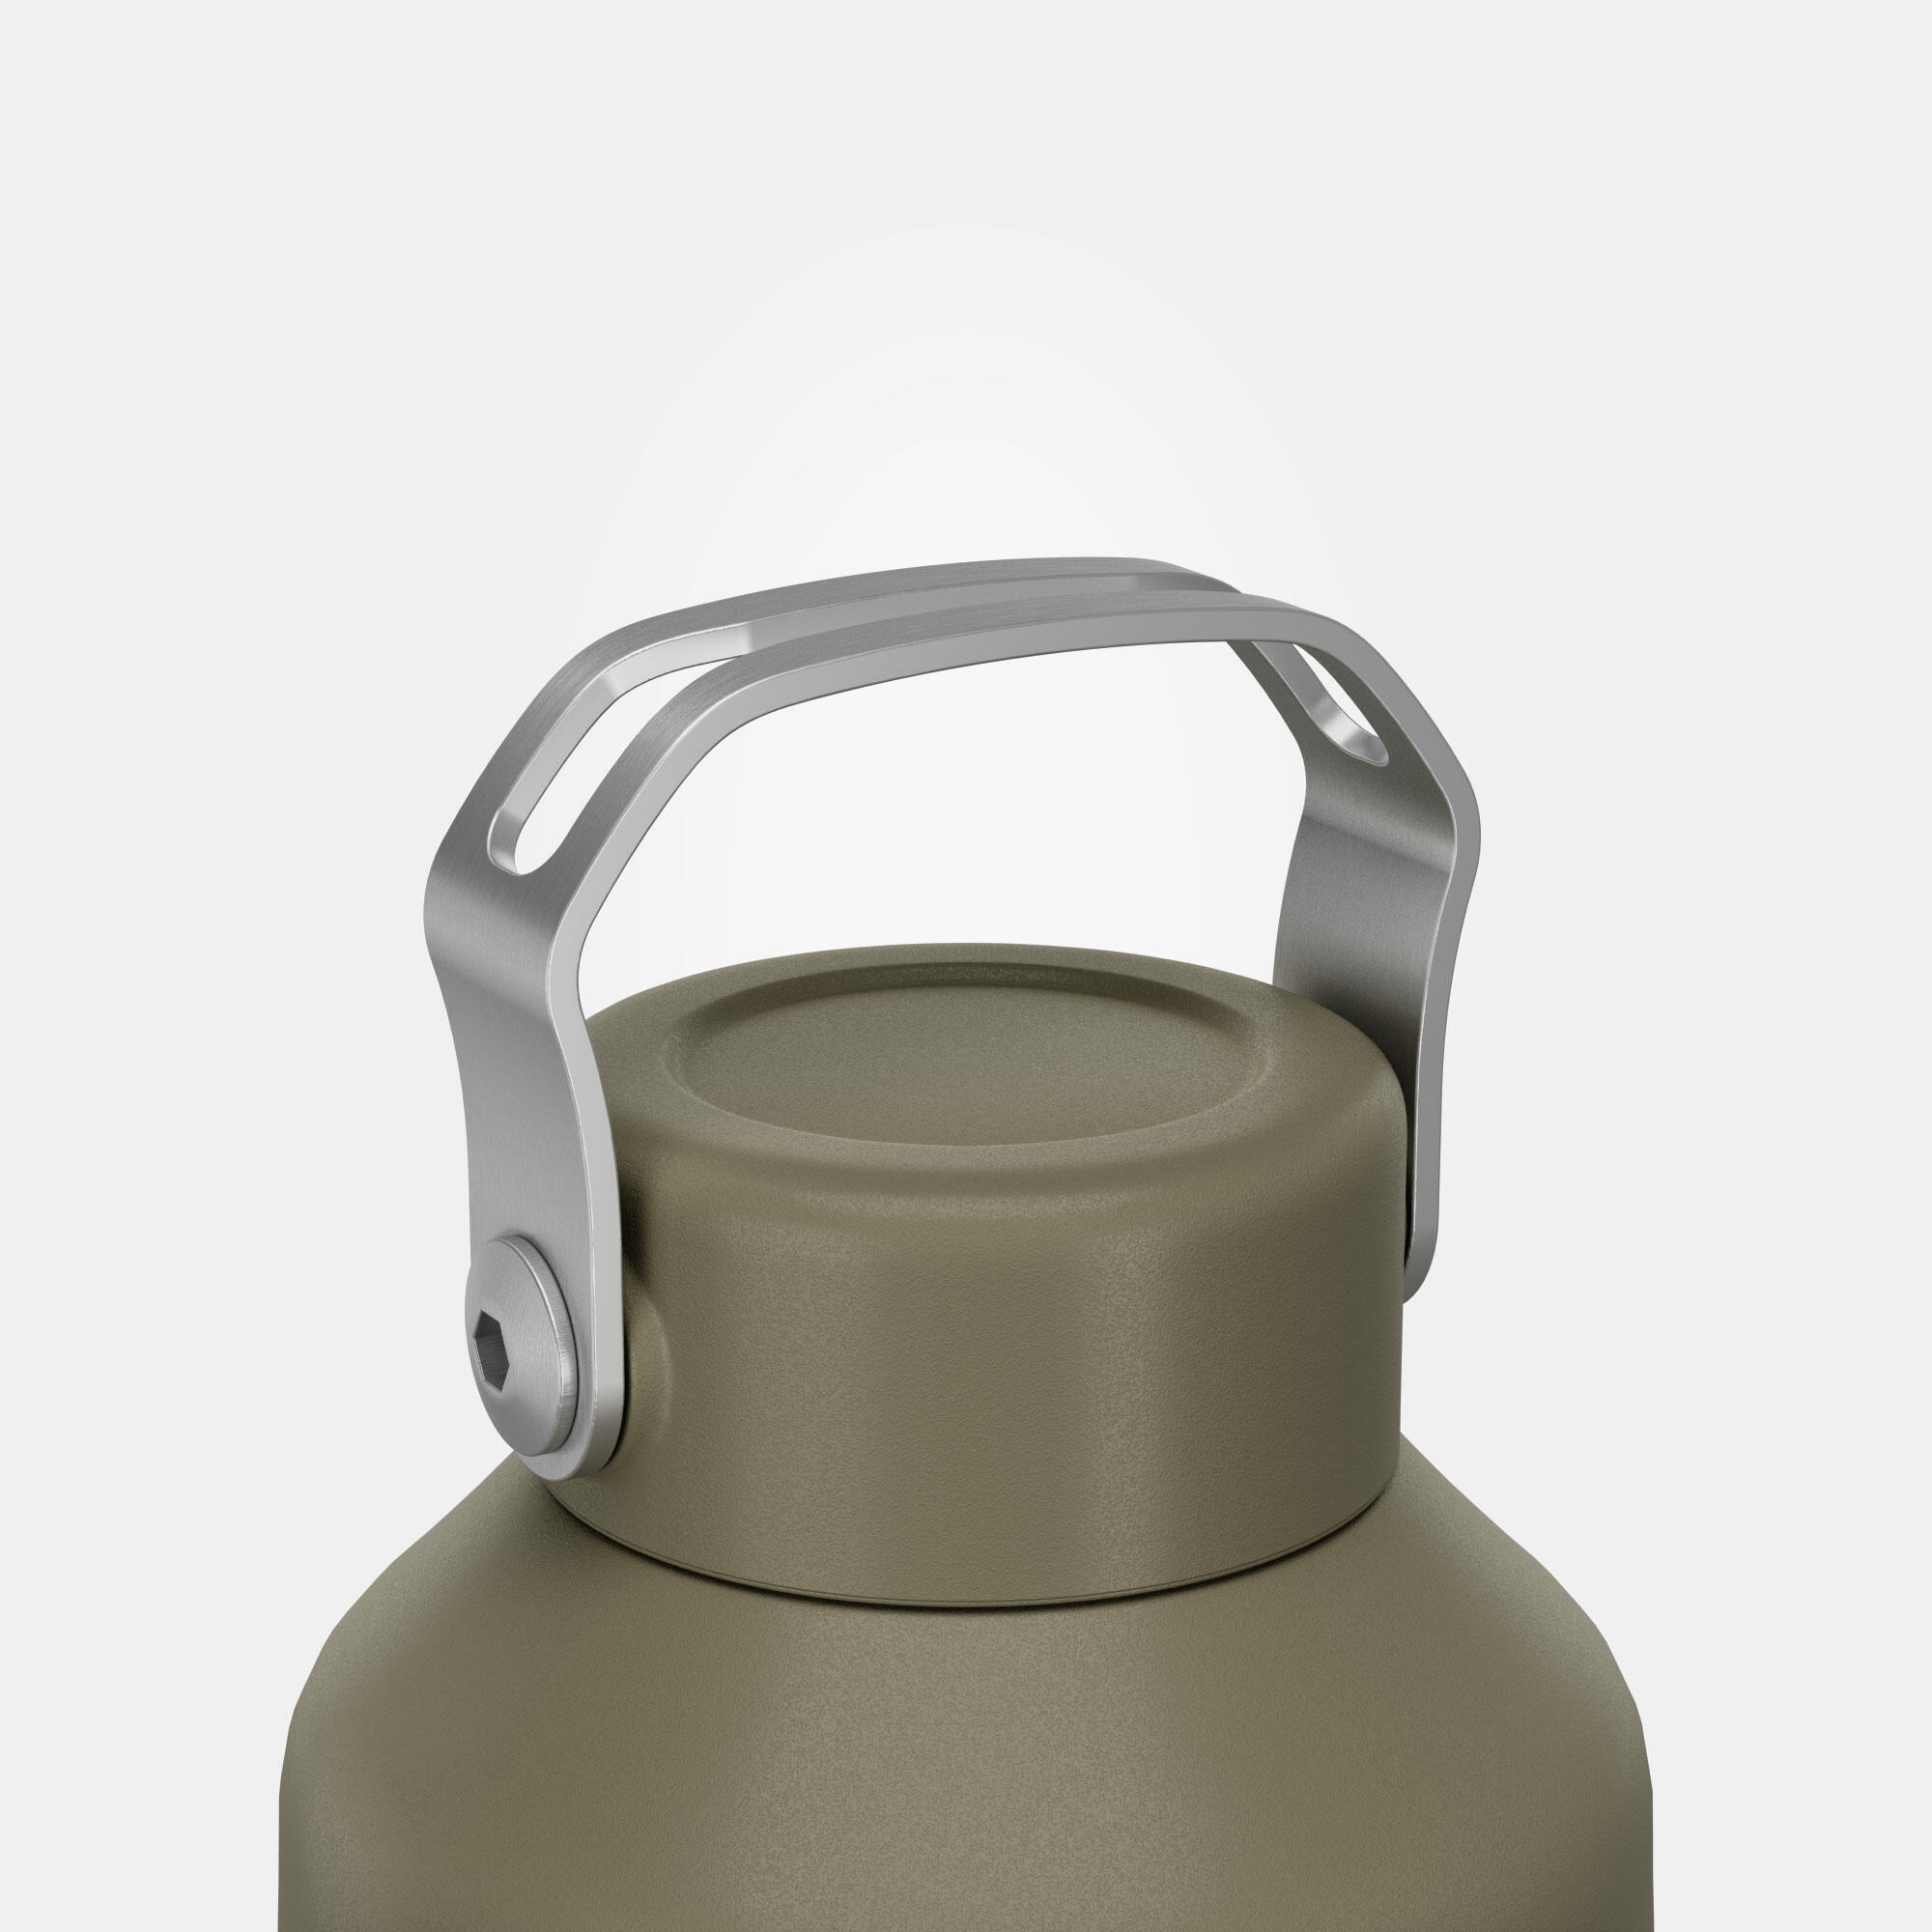 1.5 L stainless steel flask with screw cap for hiking - Khaki 4/10